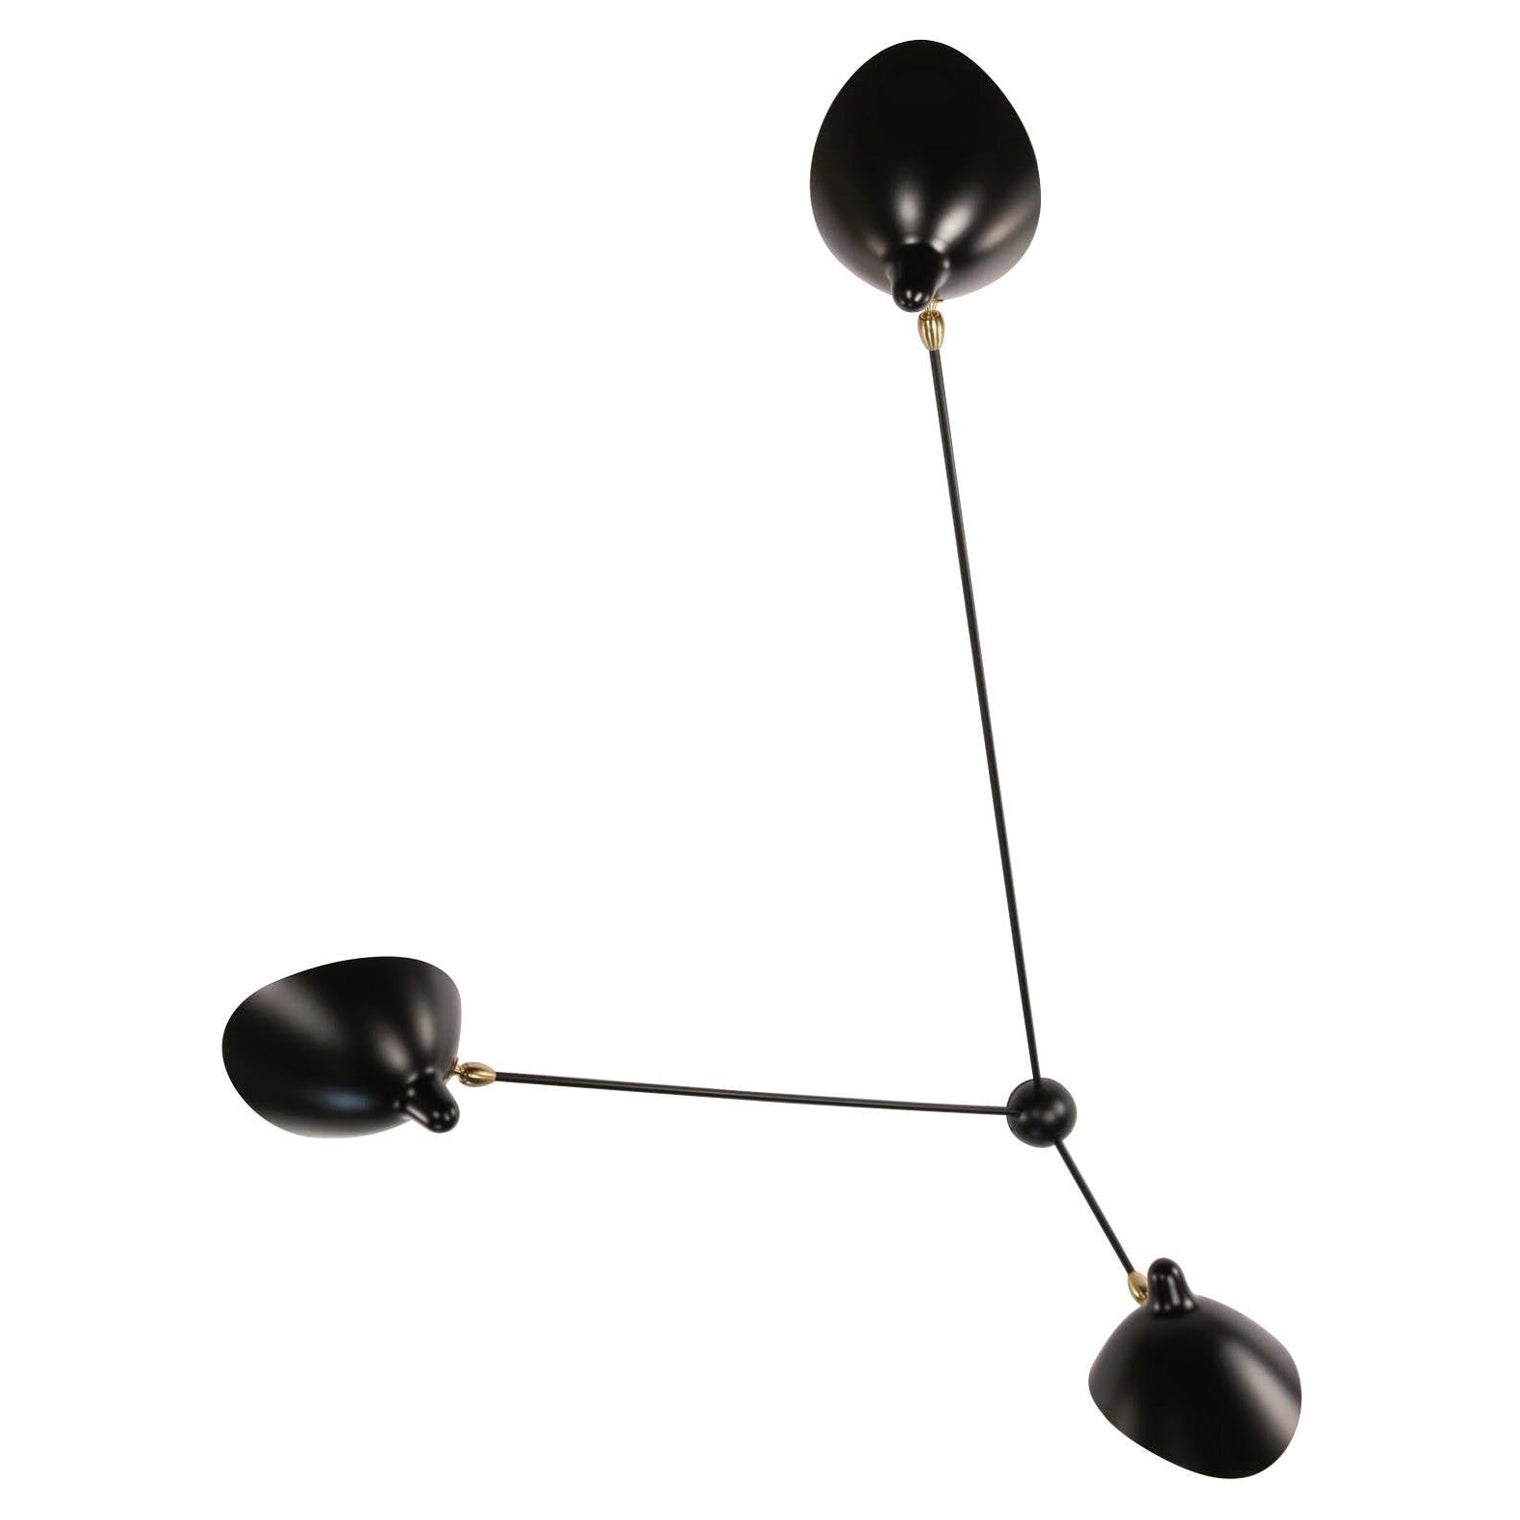 Serge Mouille - Spider Sconce with 3 Arms in Black or White